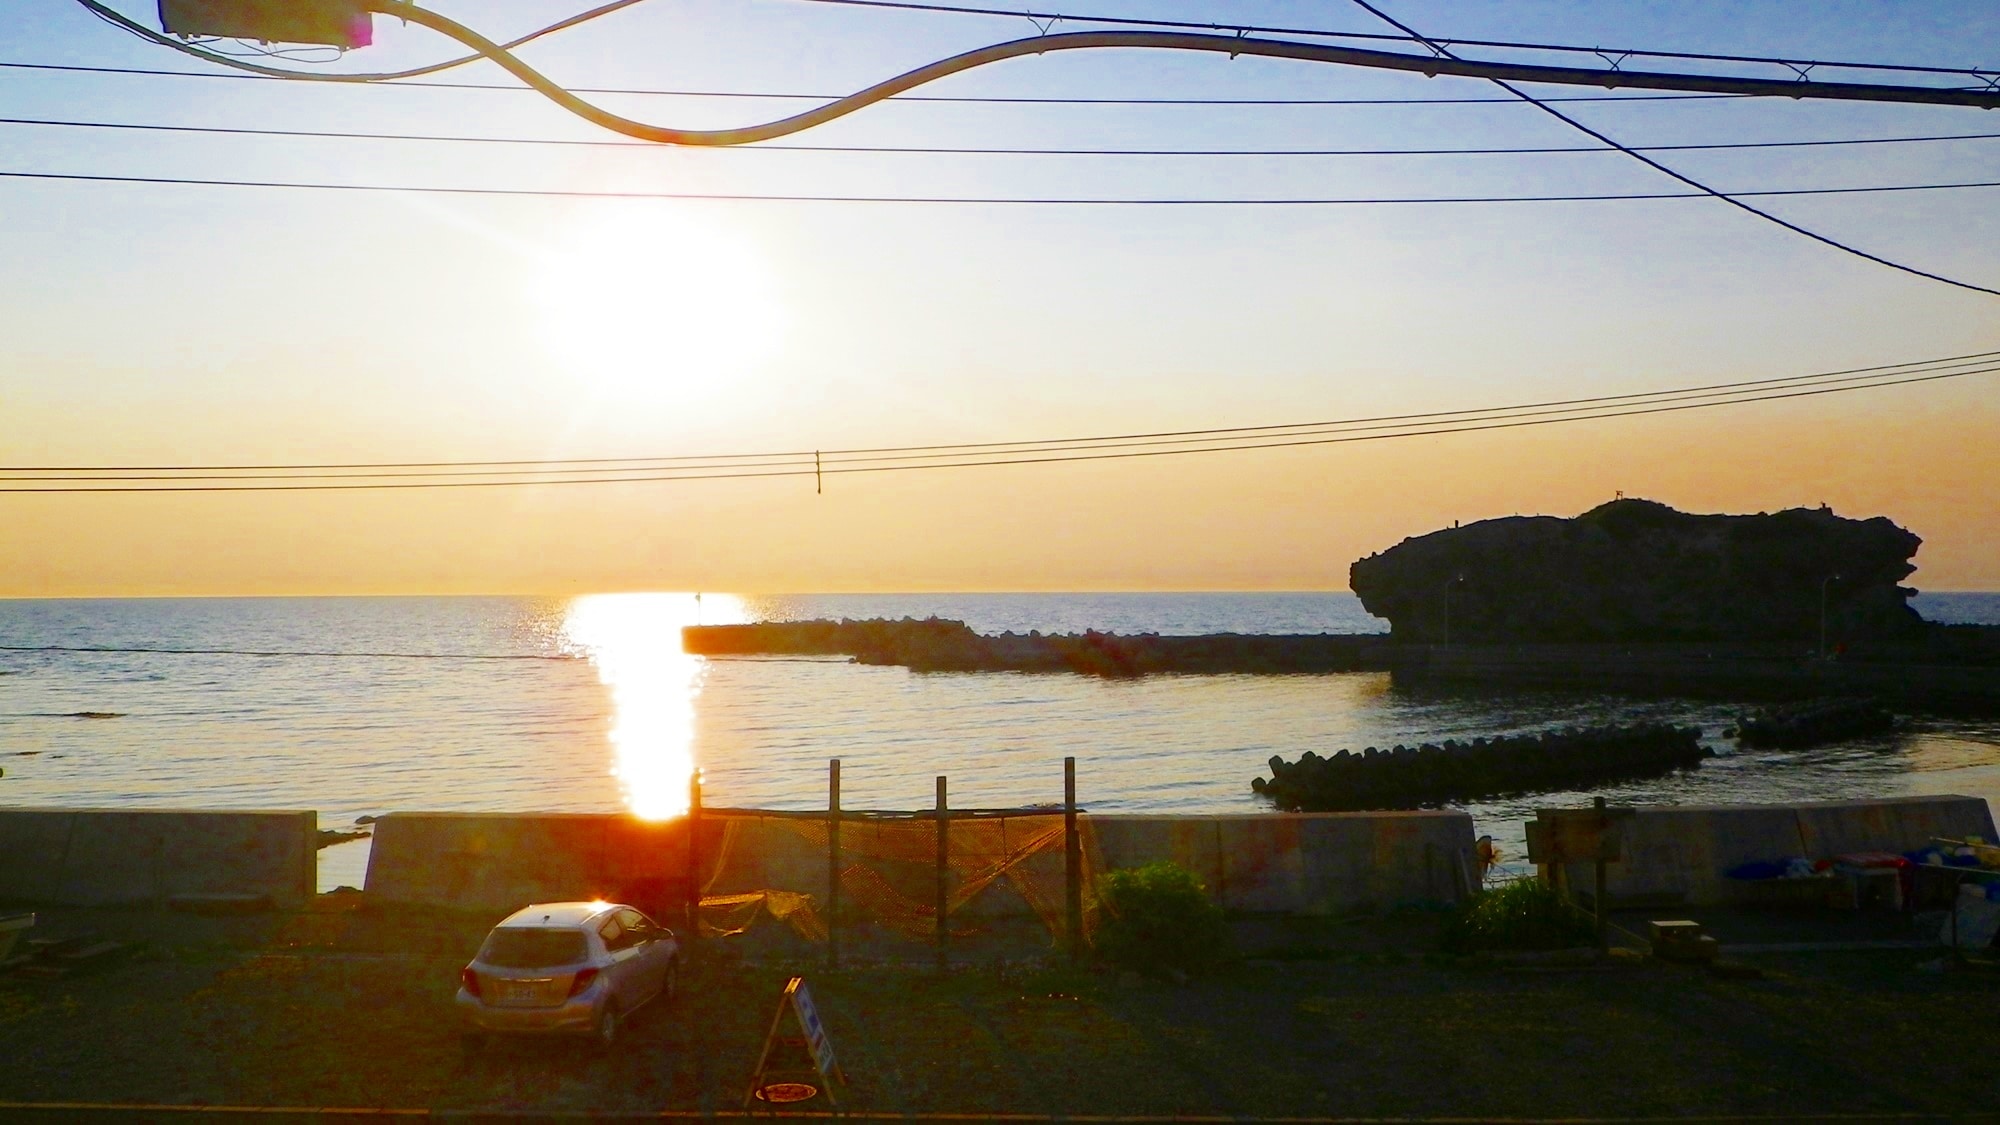 * [Sunset seen from the room] Enjoy the spectacular view of the setting sun over the sea.